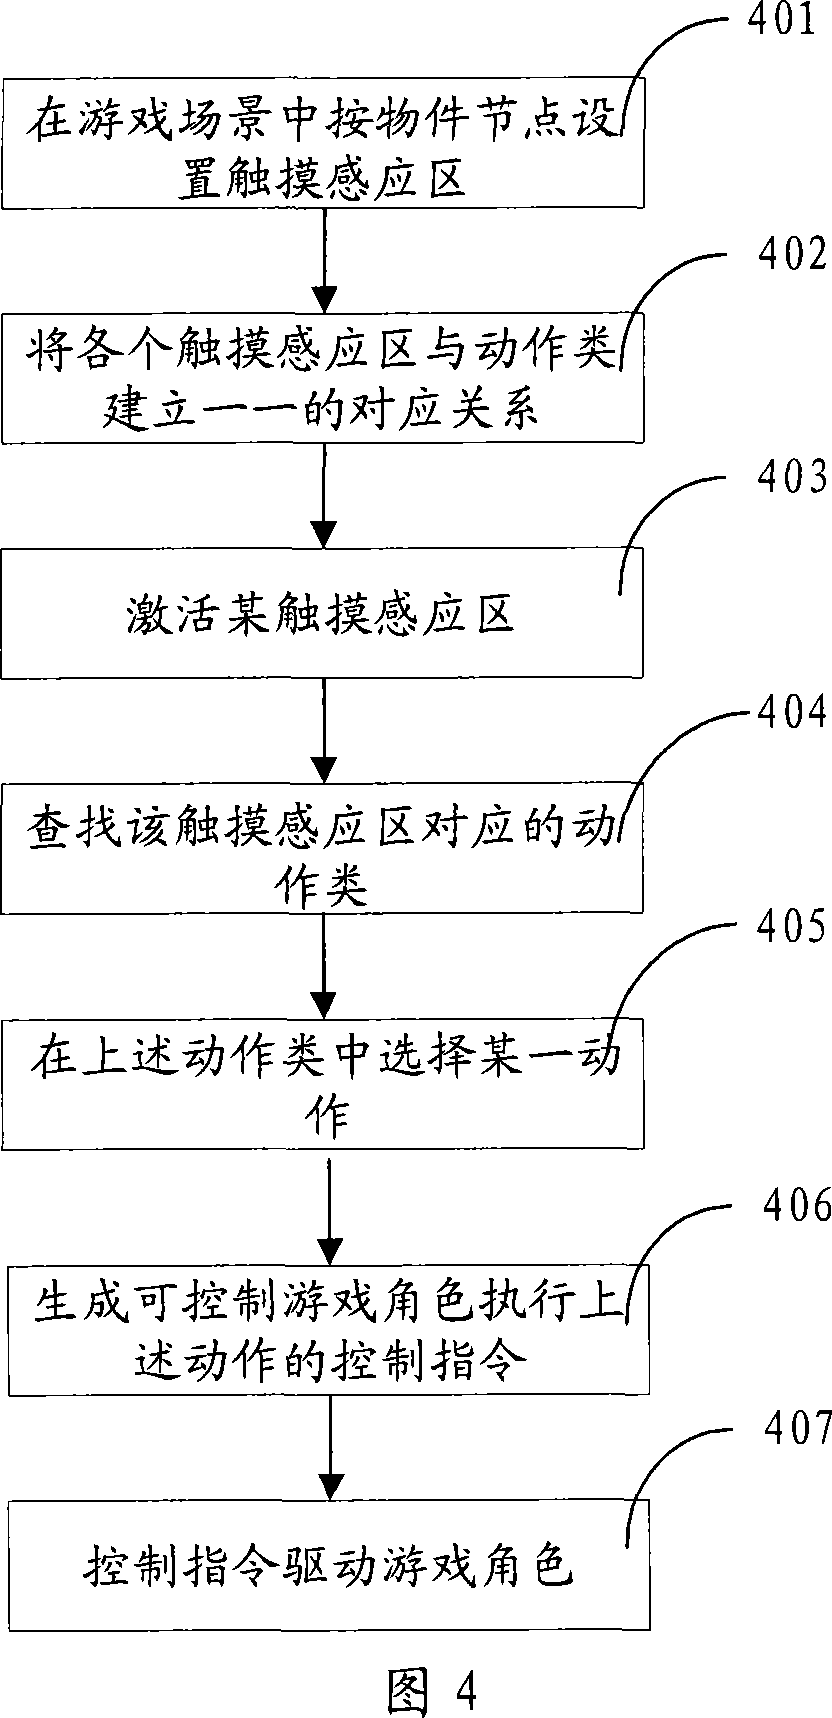 Control method and system for computer game